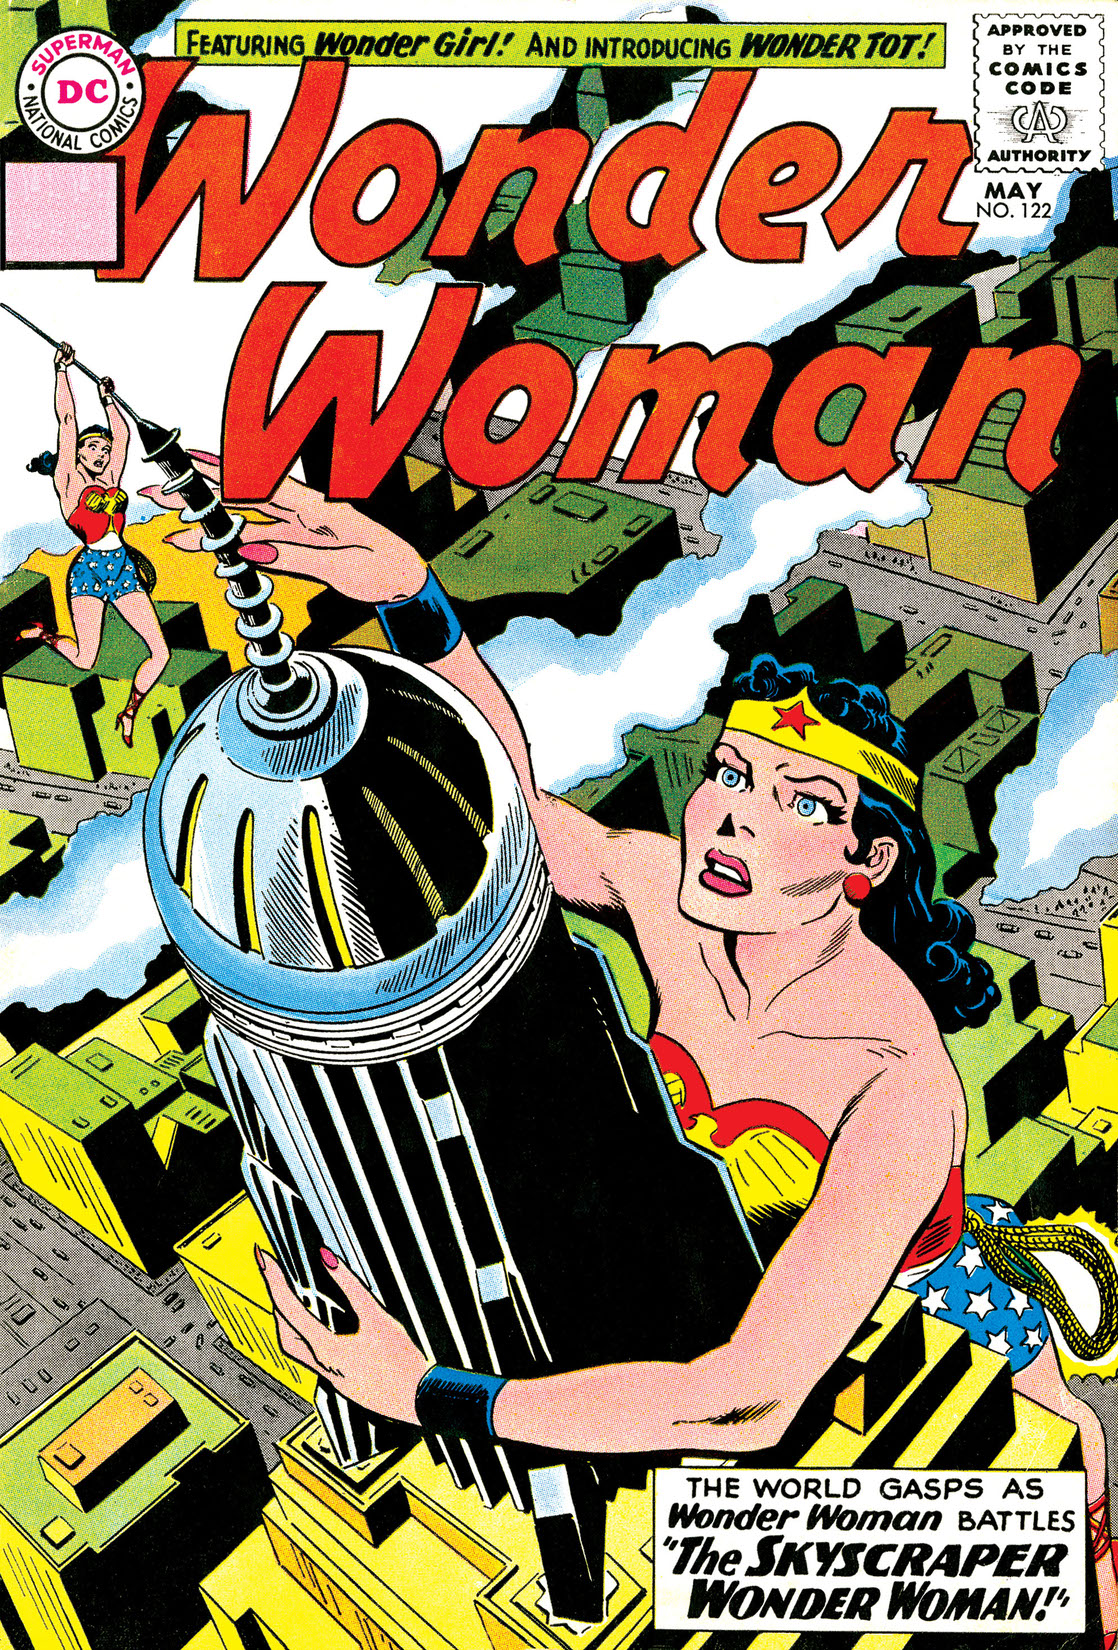 Wonder Woman (1942-) #122 preview images